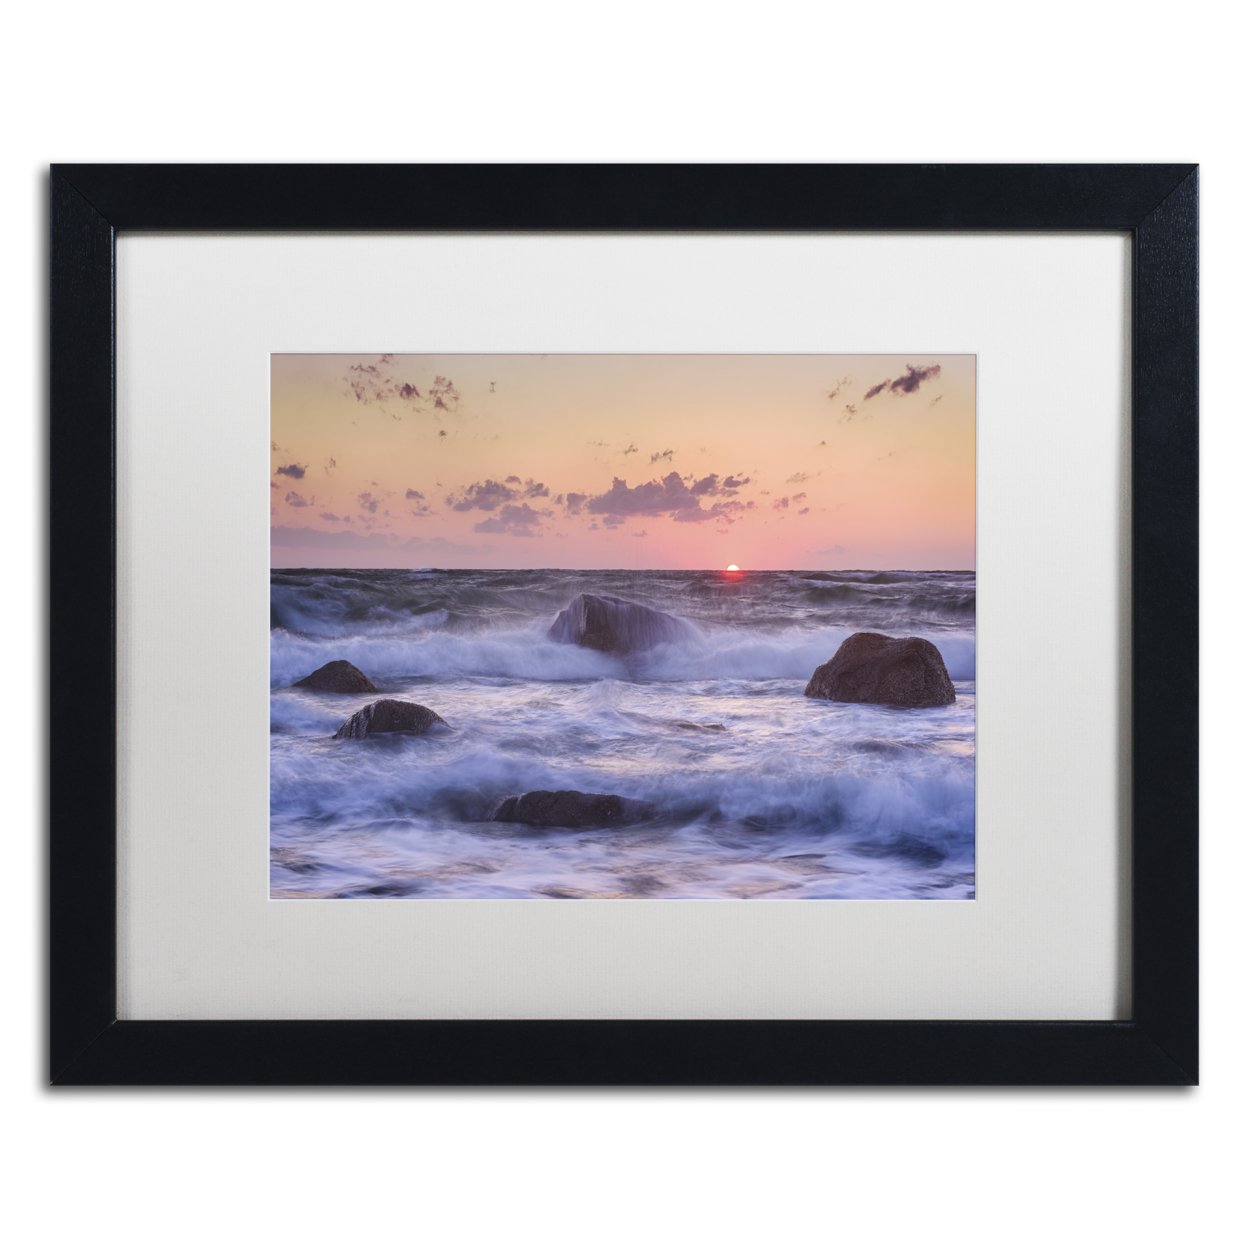 Michael Blanchette Photography 'Raging Surf' Black Wooden Framed Art 18 X 22 Inches